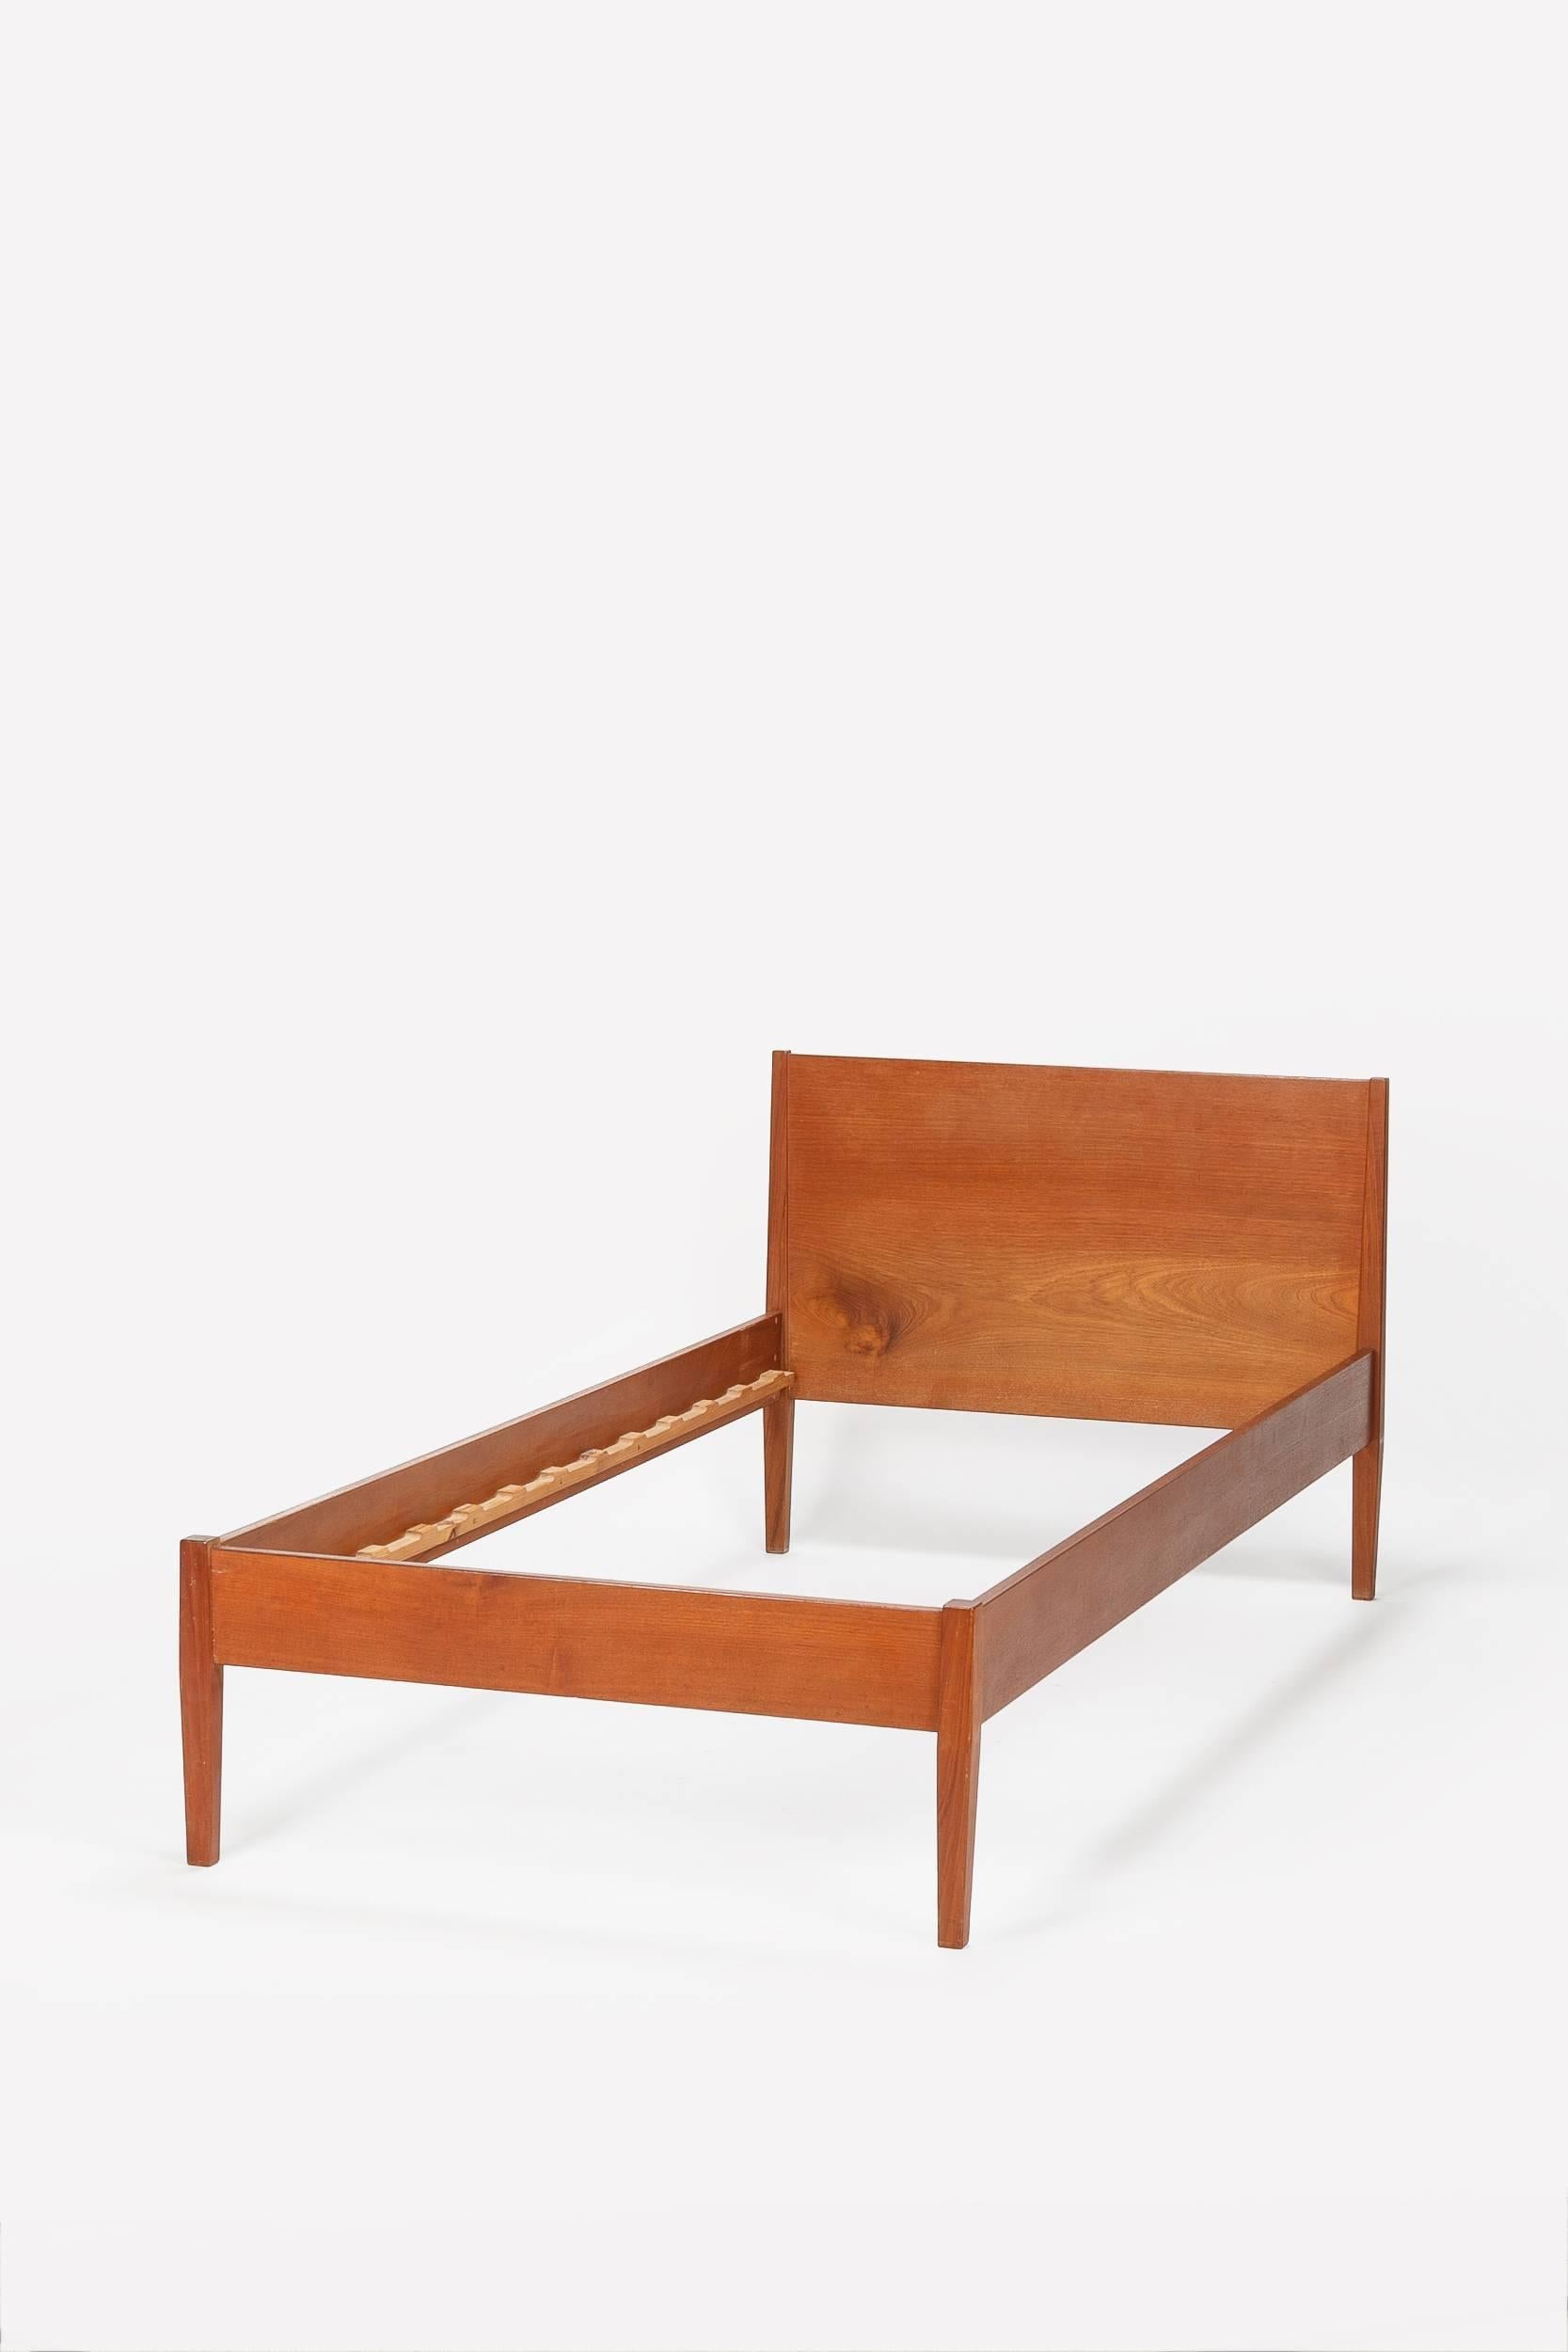 Beautiful Kaj winding teak bed manufactured by Poul Hundevad Vamdrup in Denmark in the 1960s. Very elegant shape, easy mounting with plug connections. Sprung slats made of solid beech. 